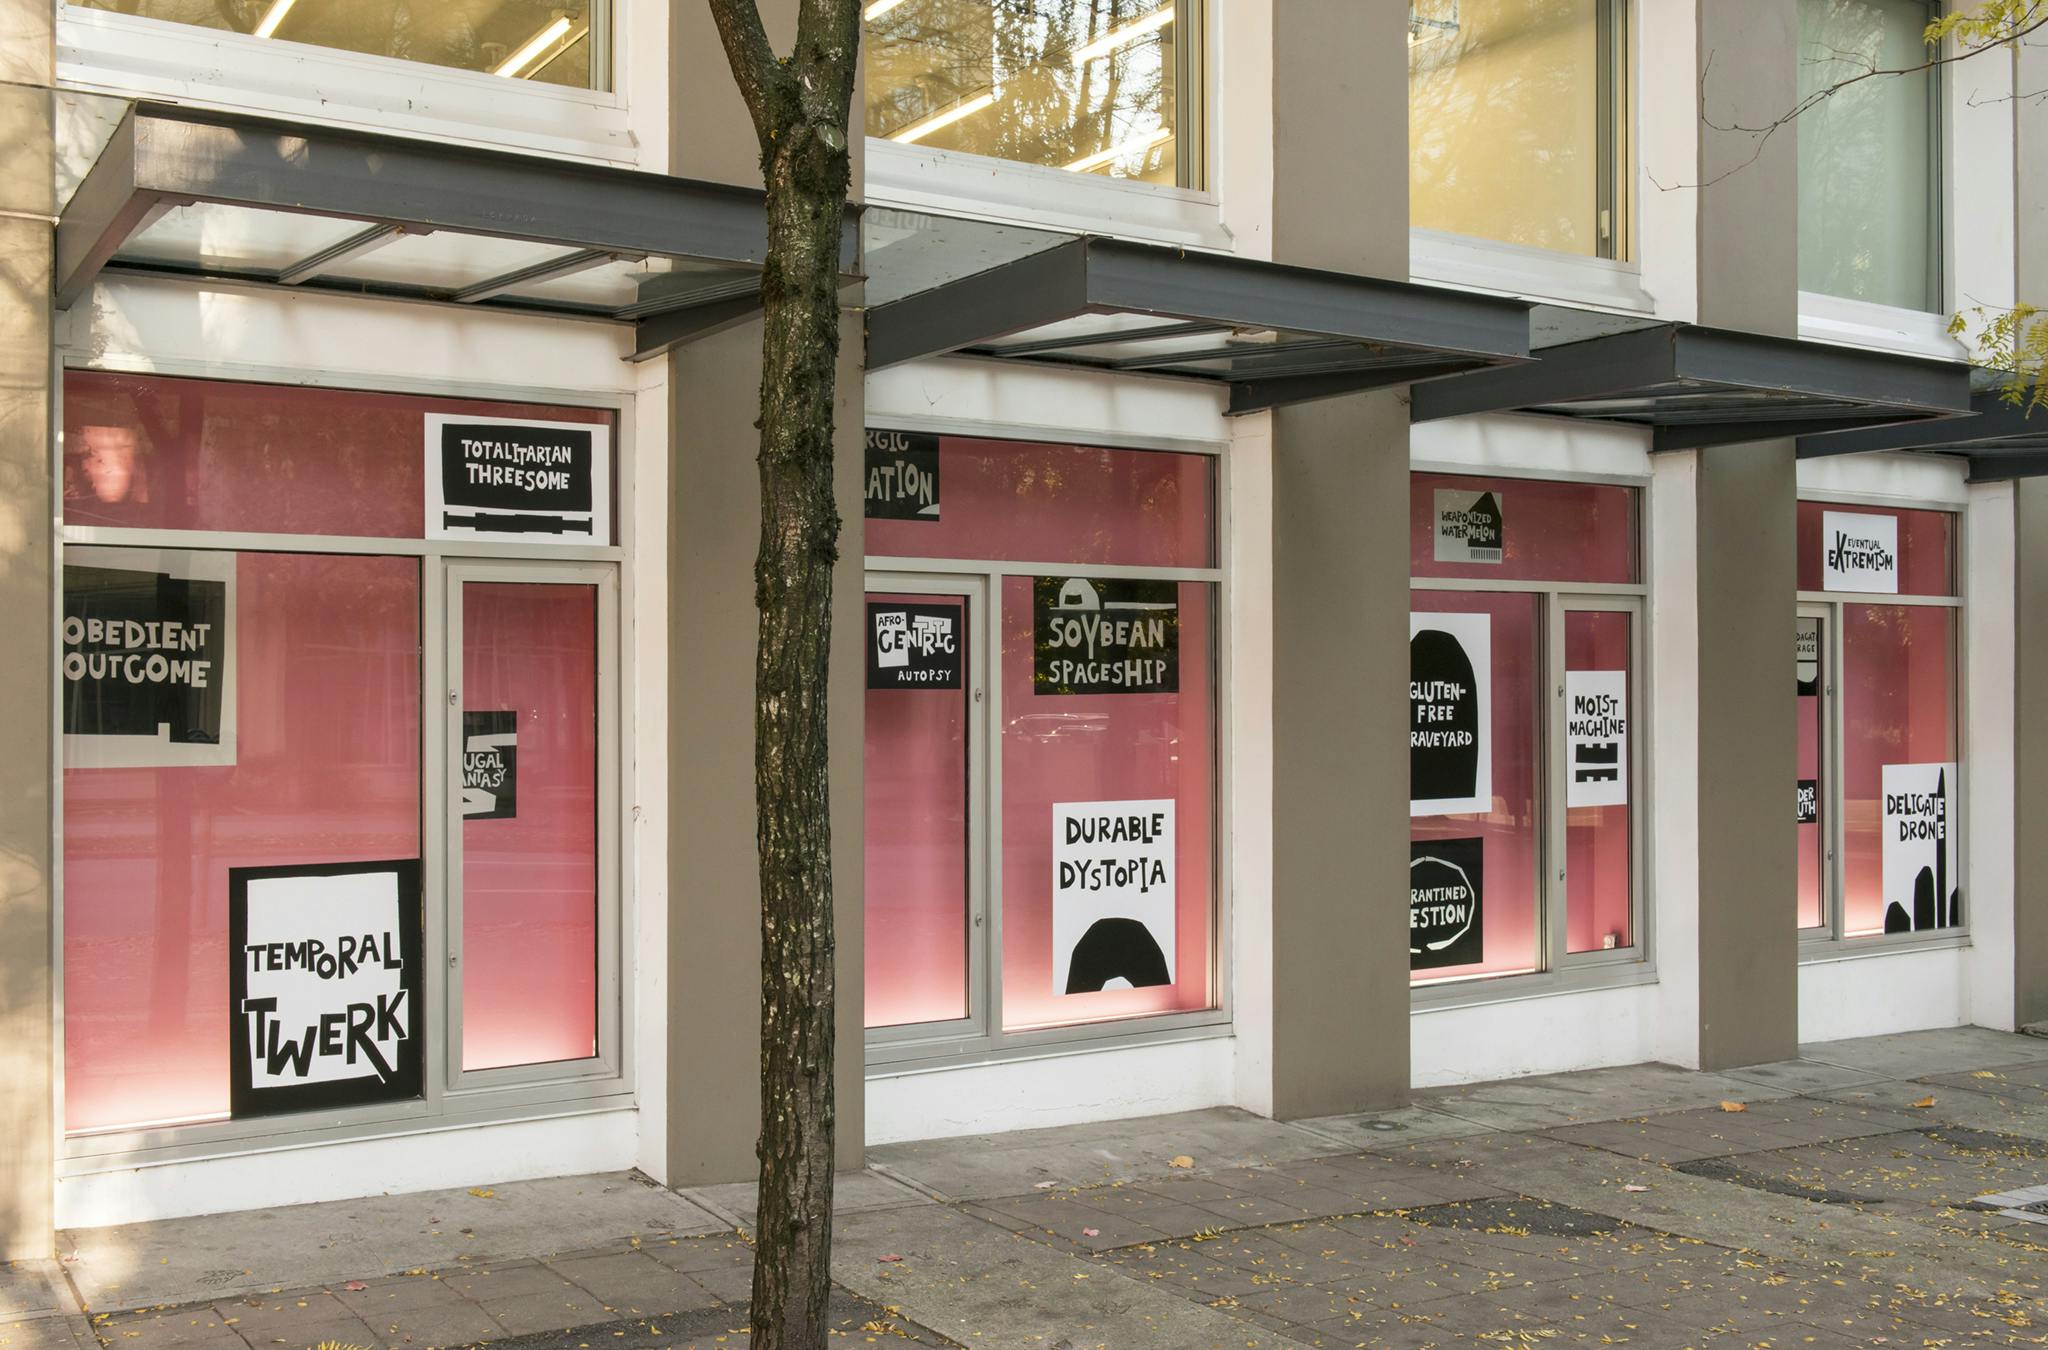 Four ground level façade windows at CAG installed with the work of Kameelah Janan Rasheed. Each window has a pink backdrop with black and white text-based vinyl prints scattered across.